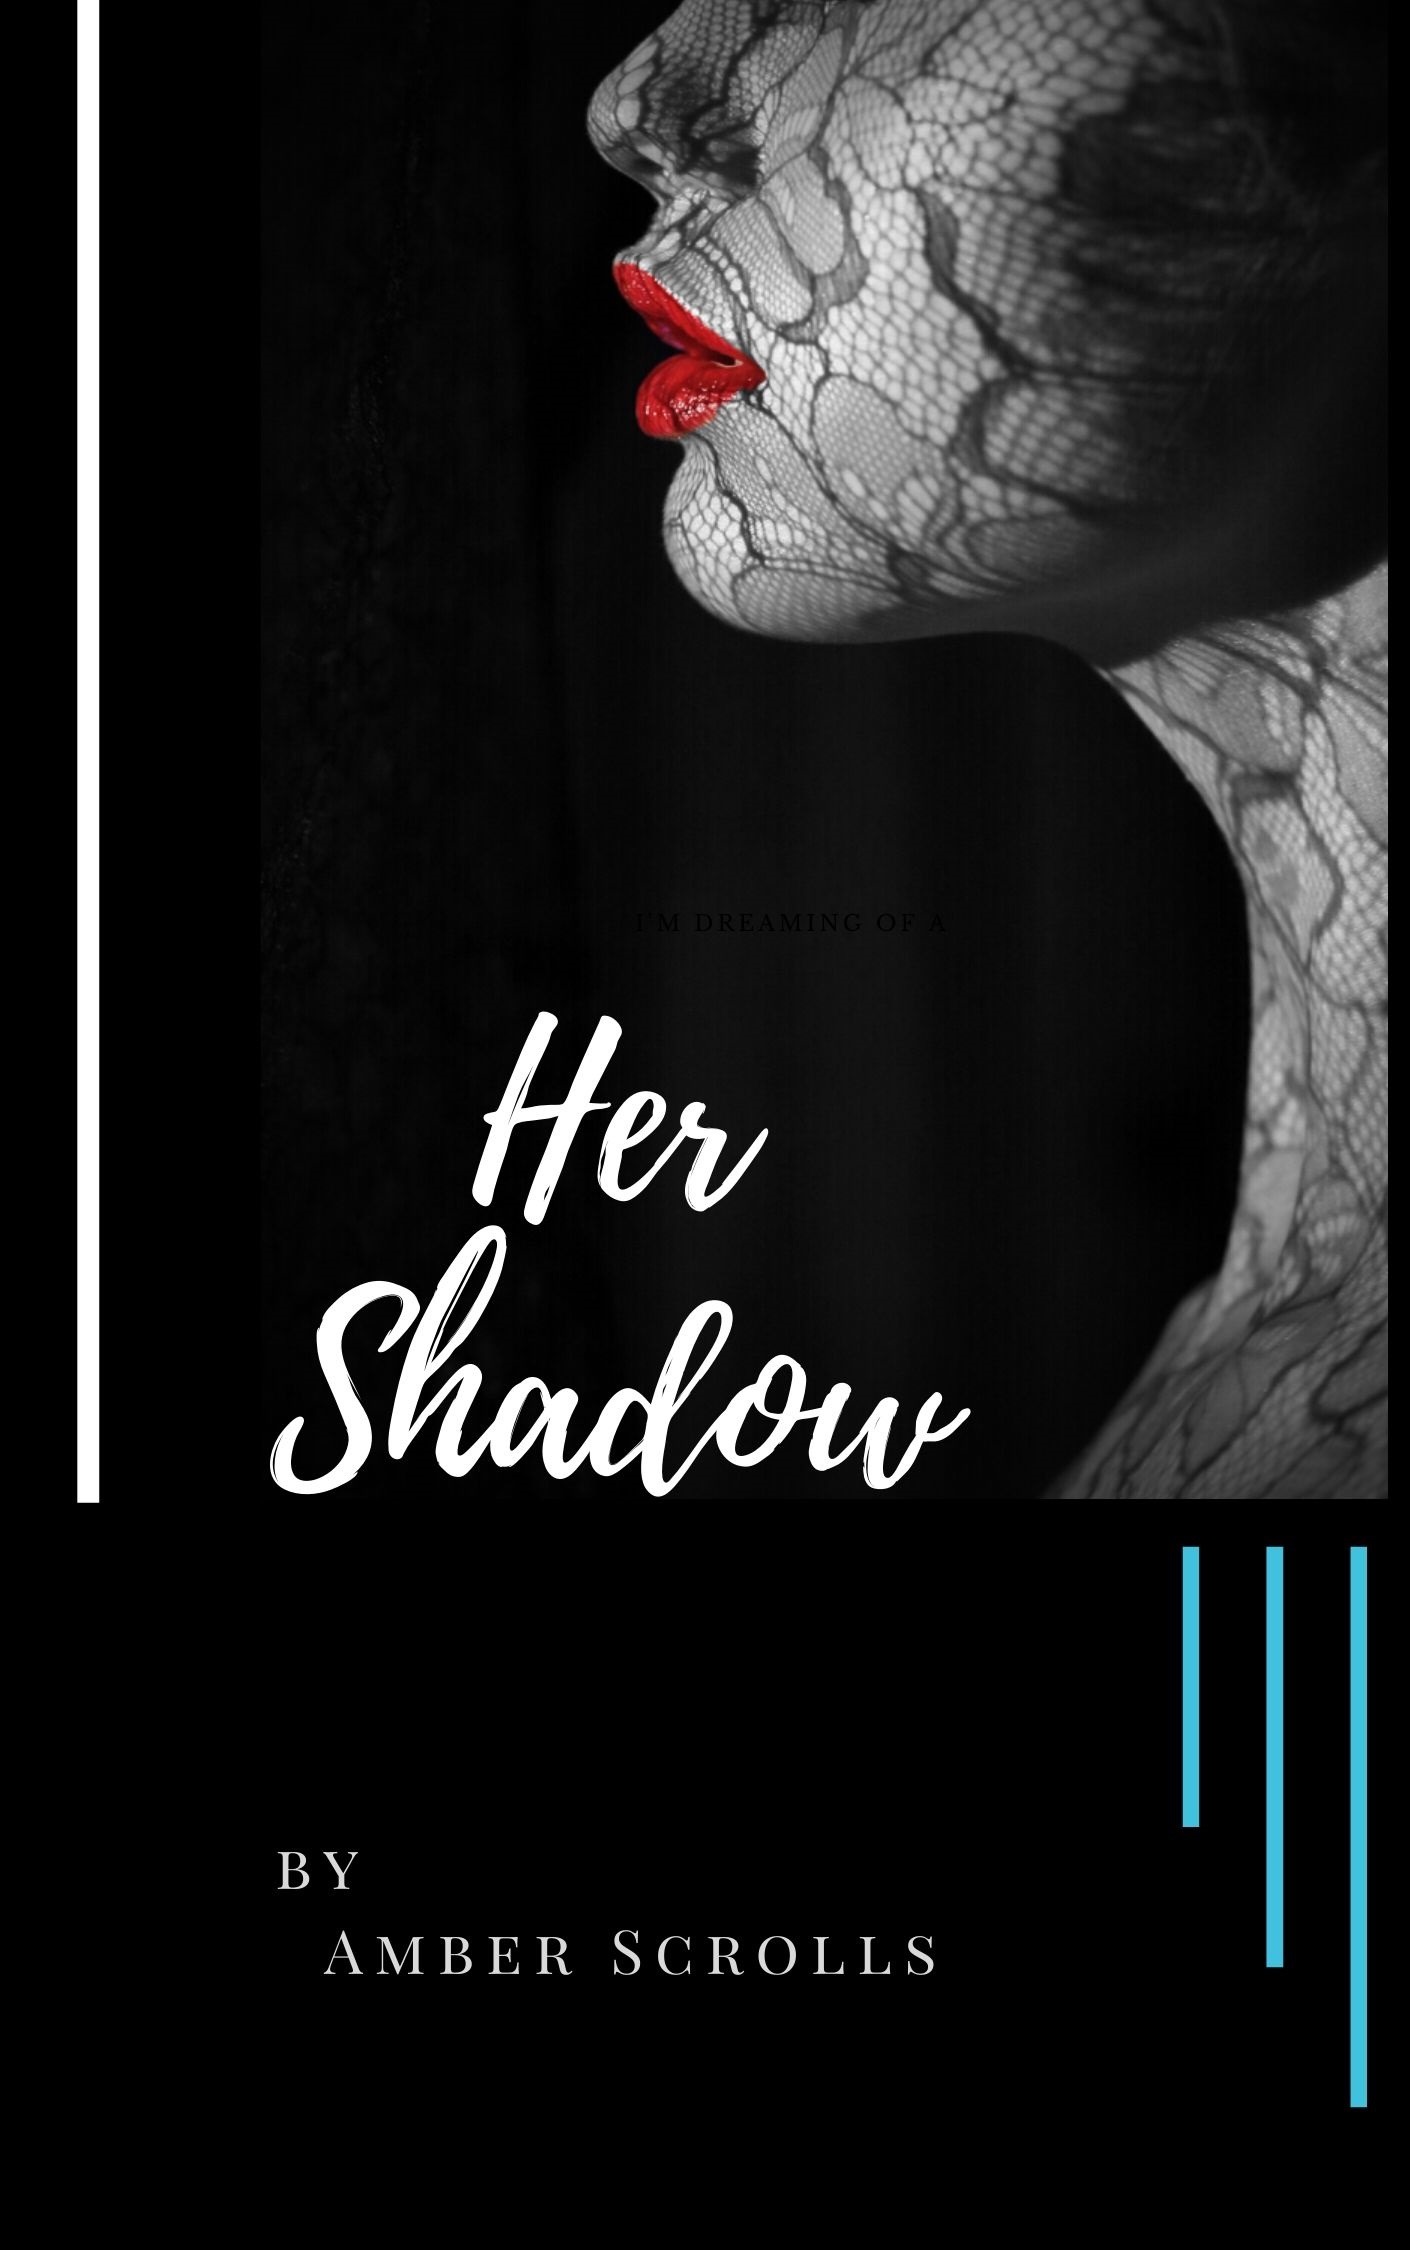 FREE: Her Shadow by Amber Scrolls